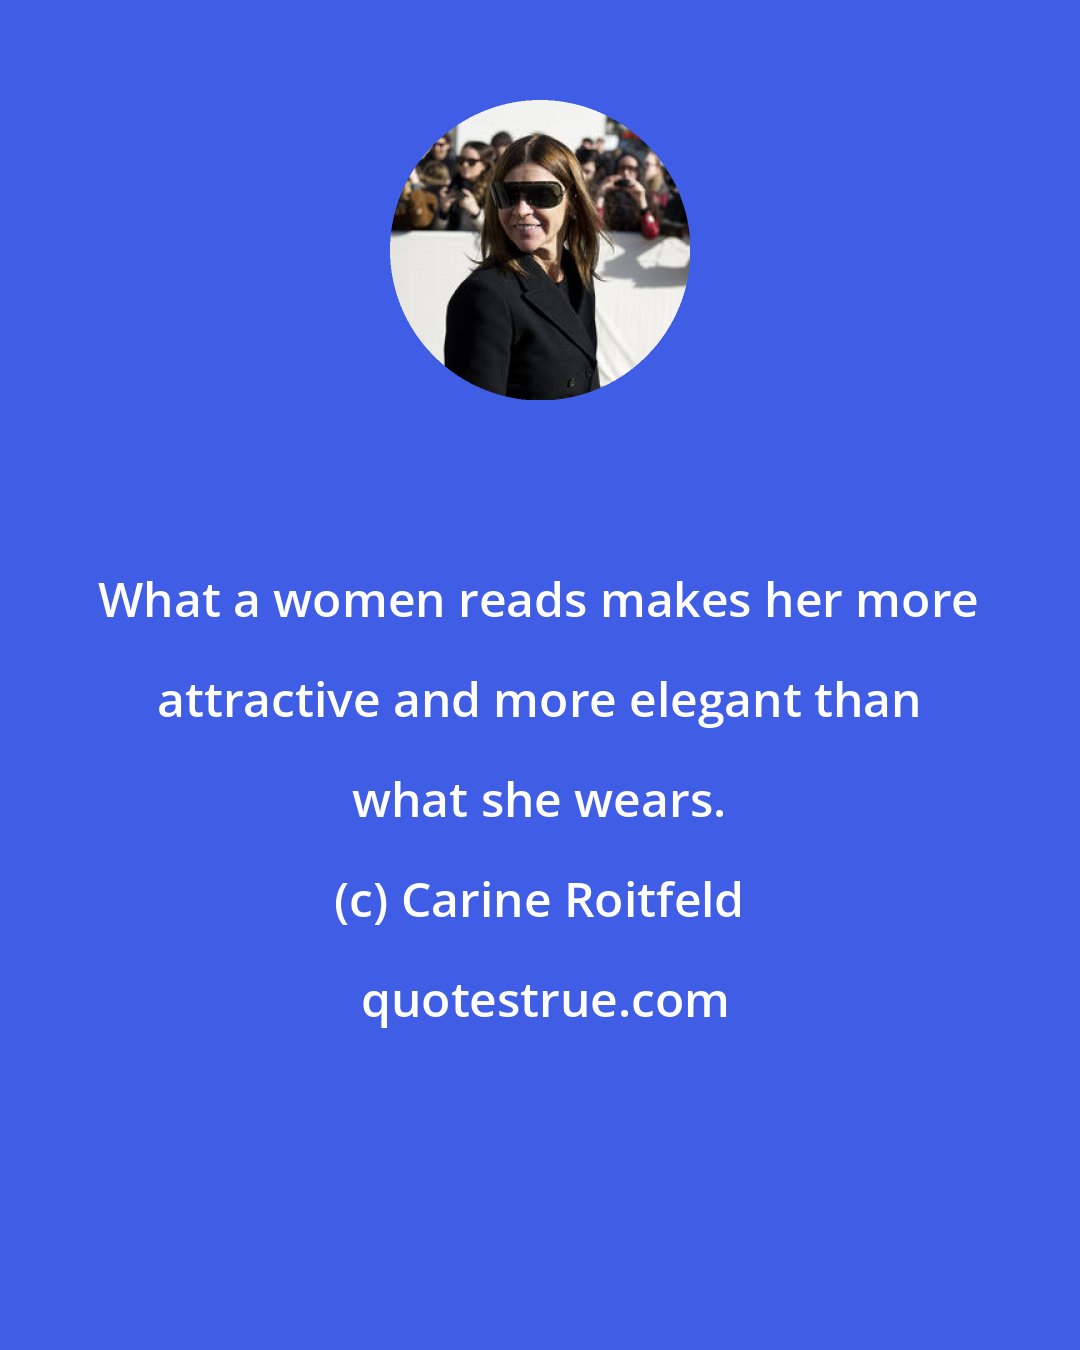 Carine Roitfeld: What a women reads makes her more attractive and more elegant than what she wears.